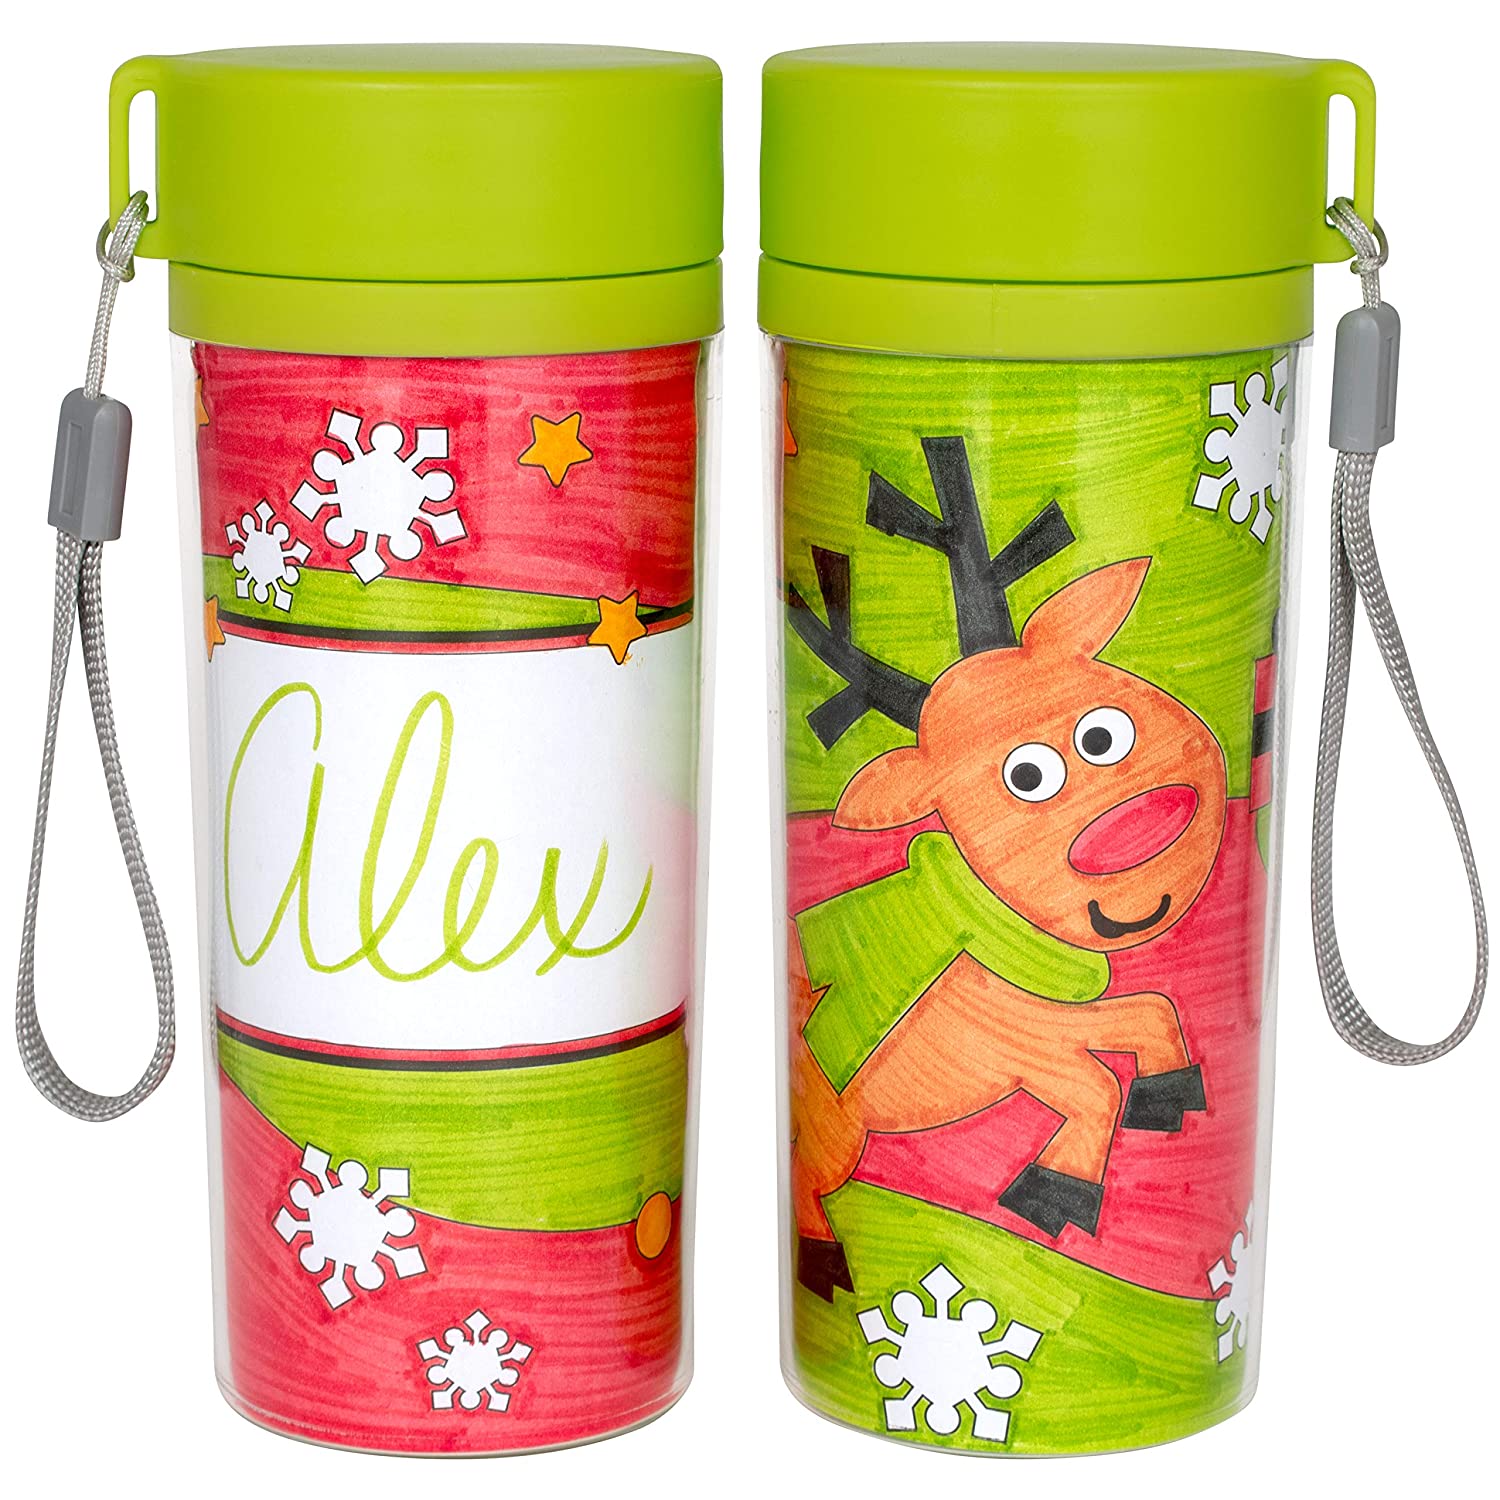 2-Count Ready To Learn Christmas Crafts Design Your Own Reusable 11 oz Travel Mugs Set $5 + FS w/ Amazon Prime or FS on $25+